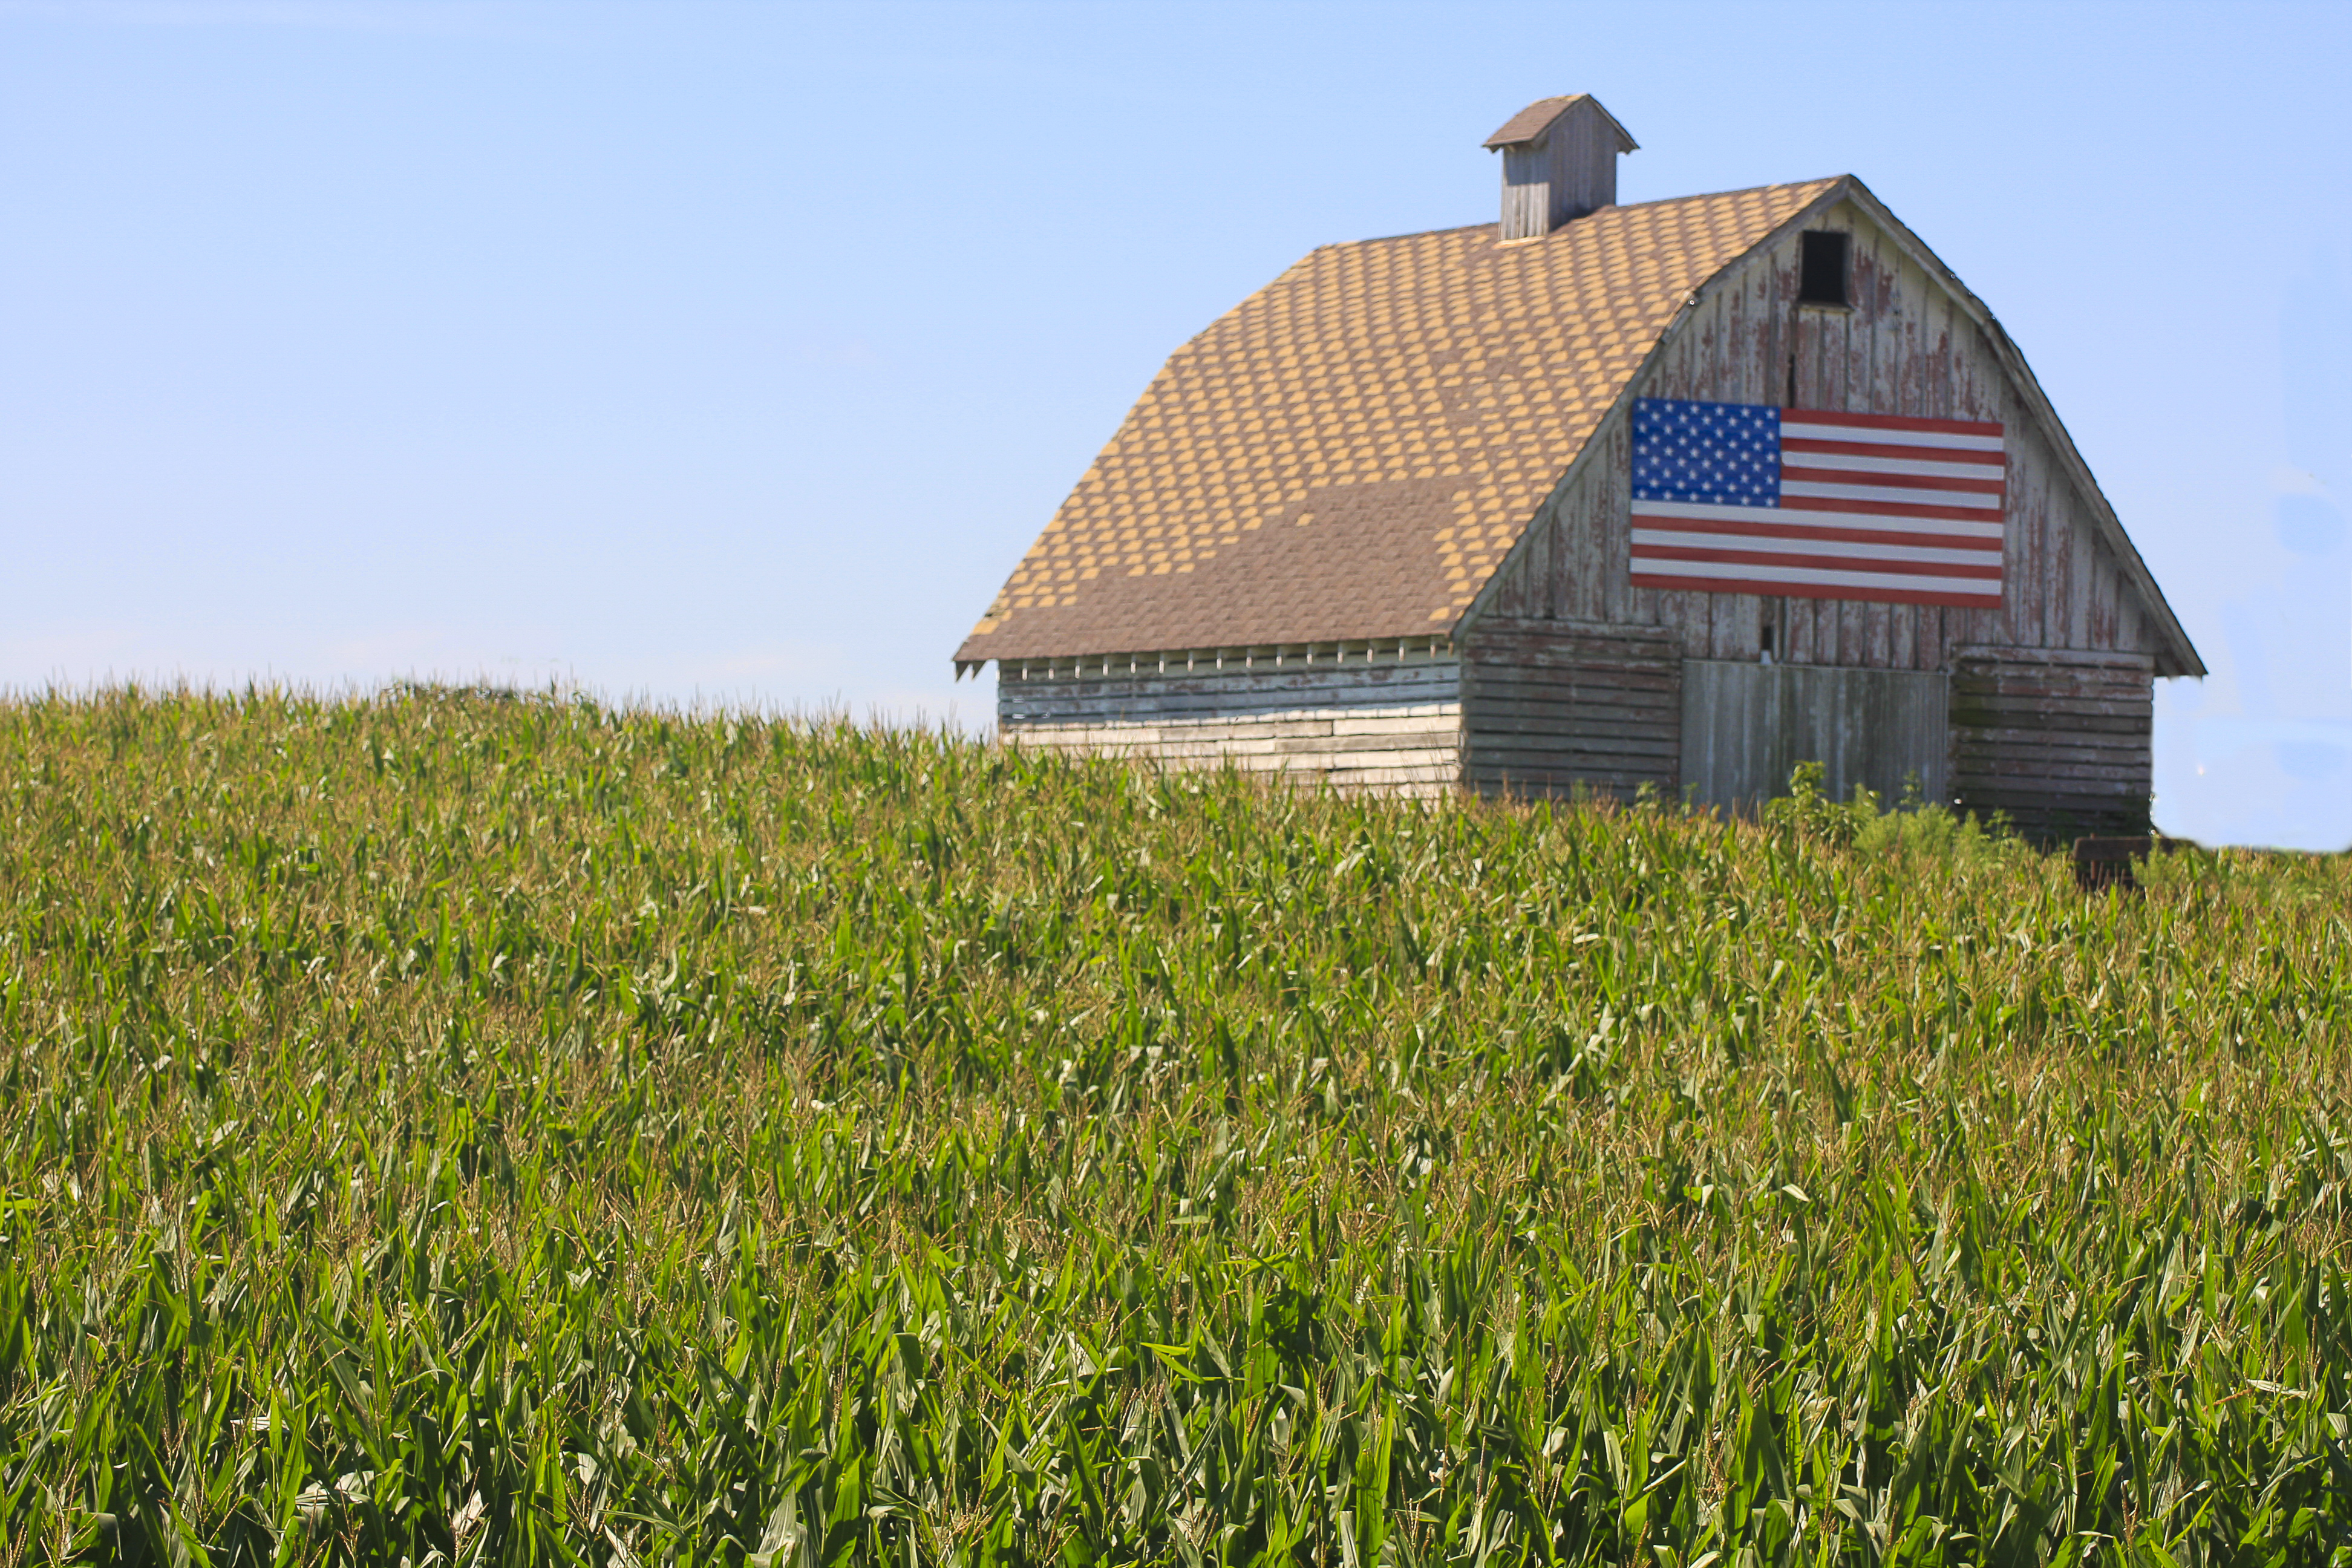 Photo of a barn with a U.S. flag in the middle of a large cornfield